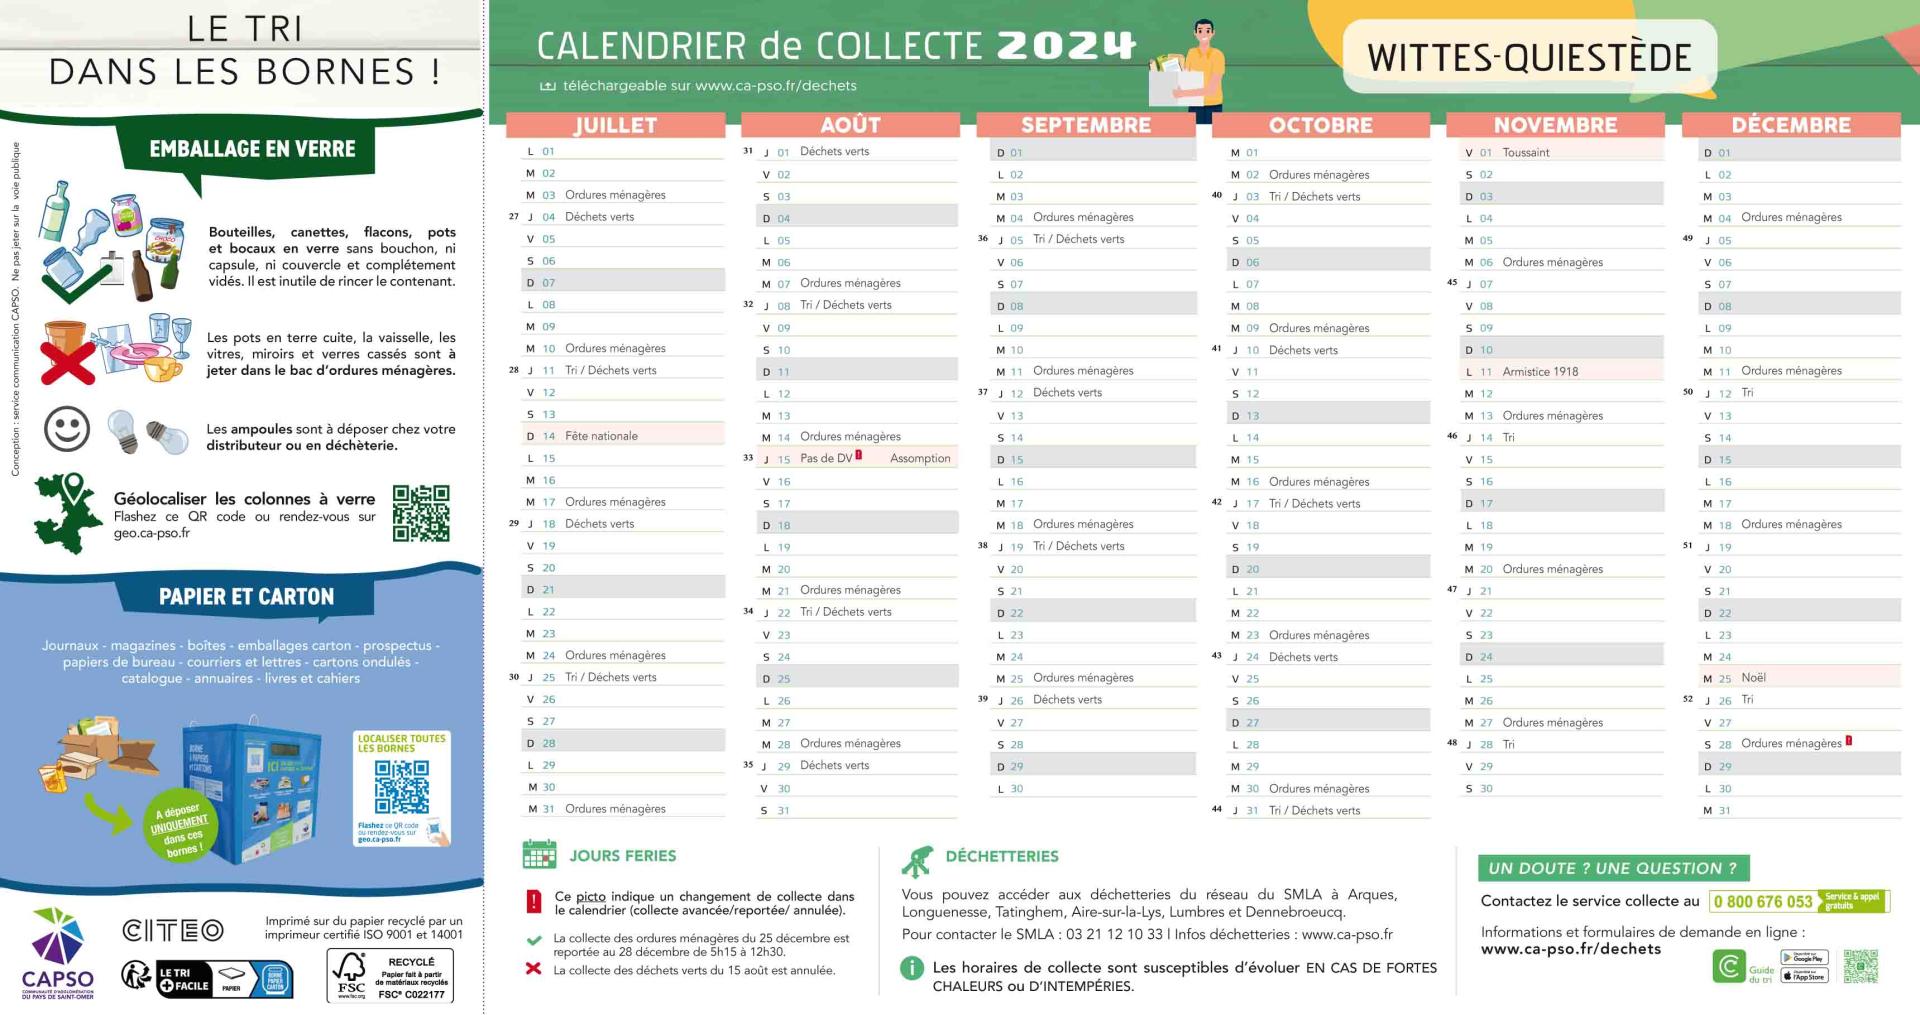 Wittes quiestede calendrier 2024 web 2